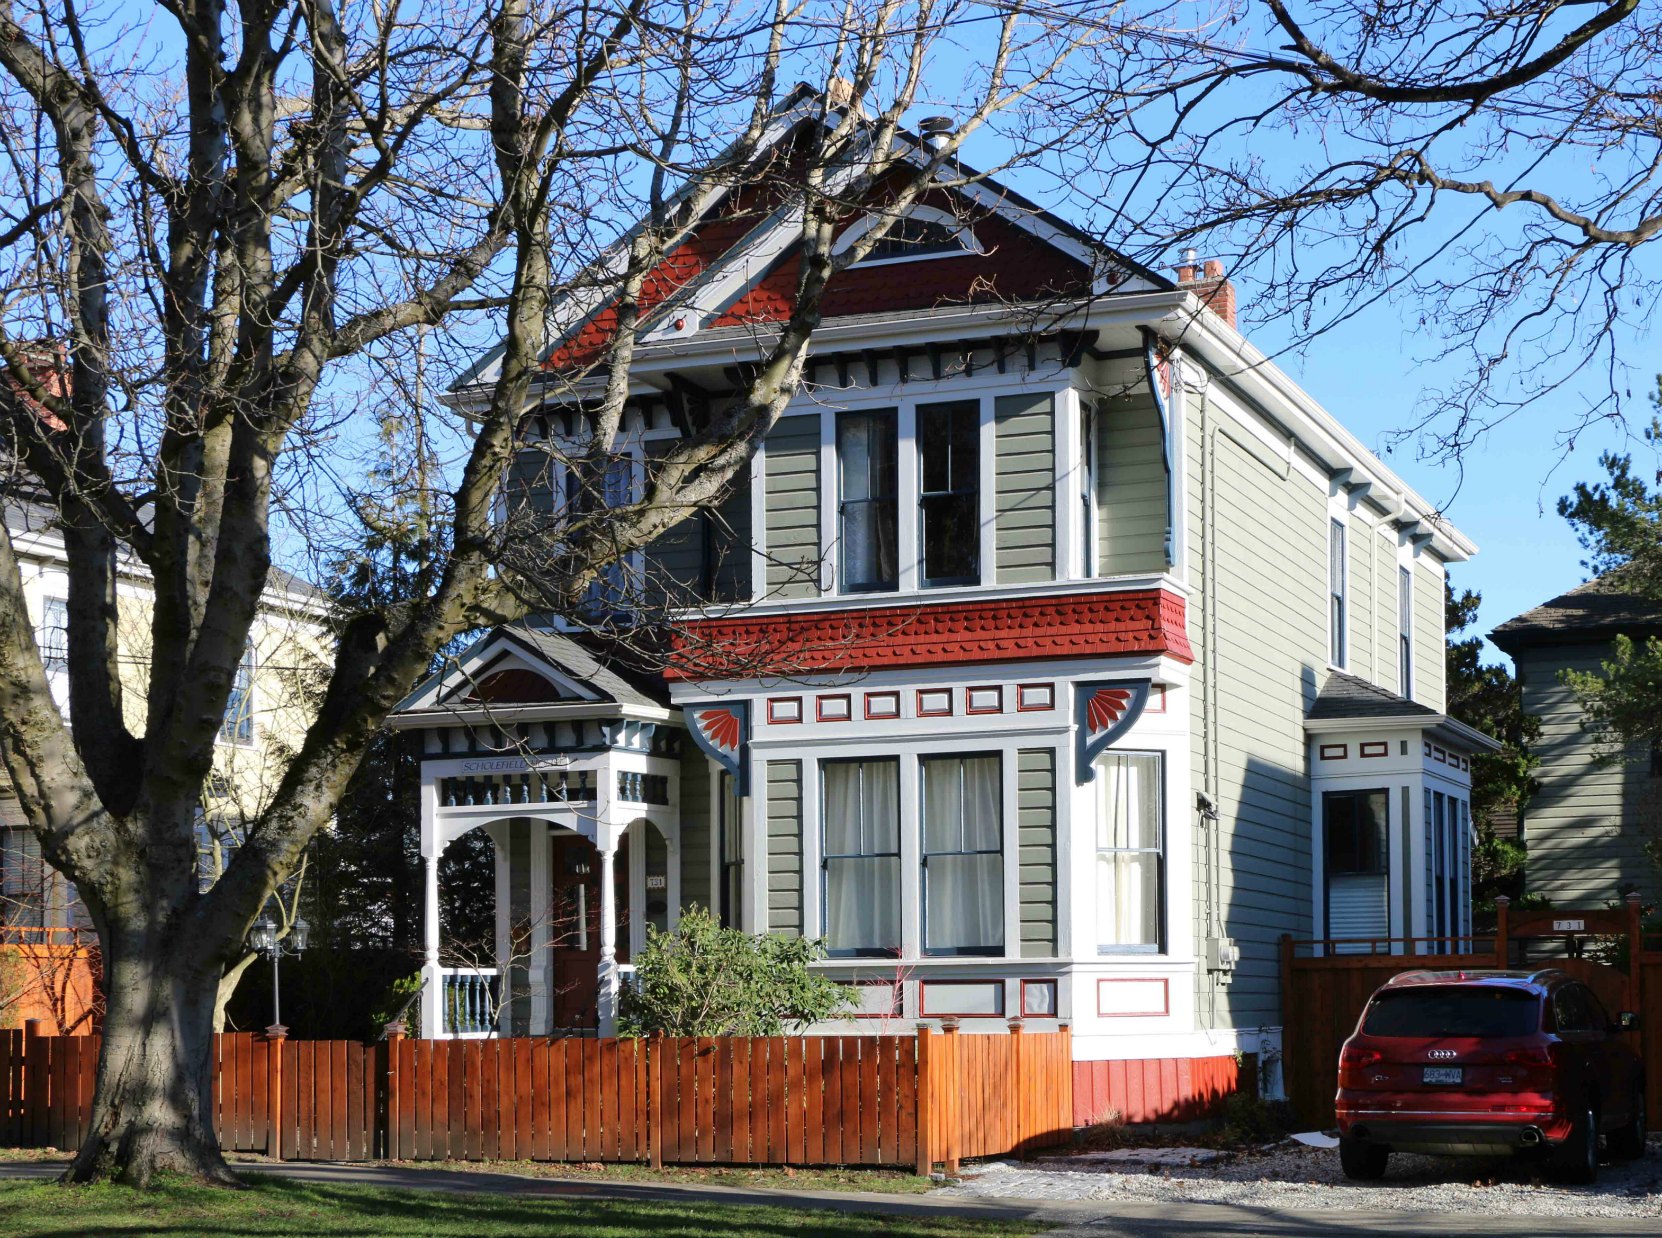 731 Vancouver Street, designed and built in 1892 by architect John Teague (photo by Victoria Online Sightseeing Tours)